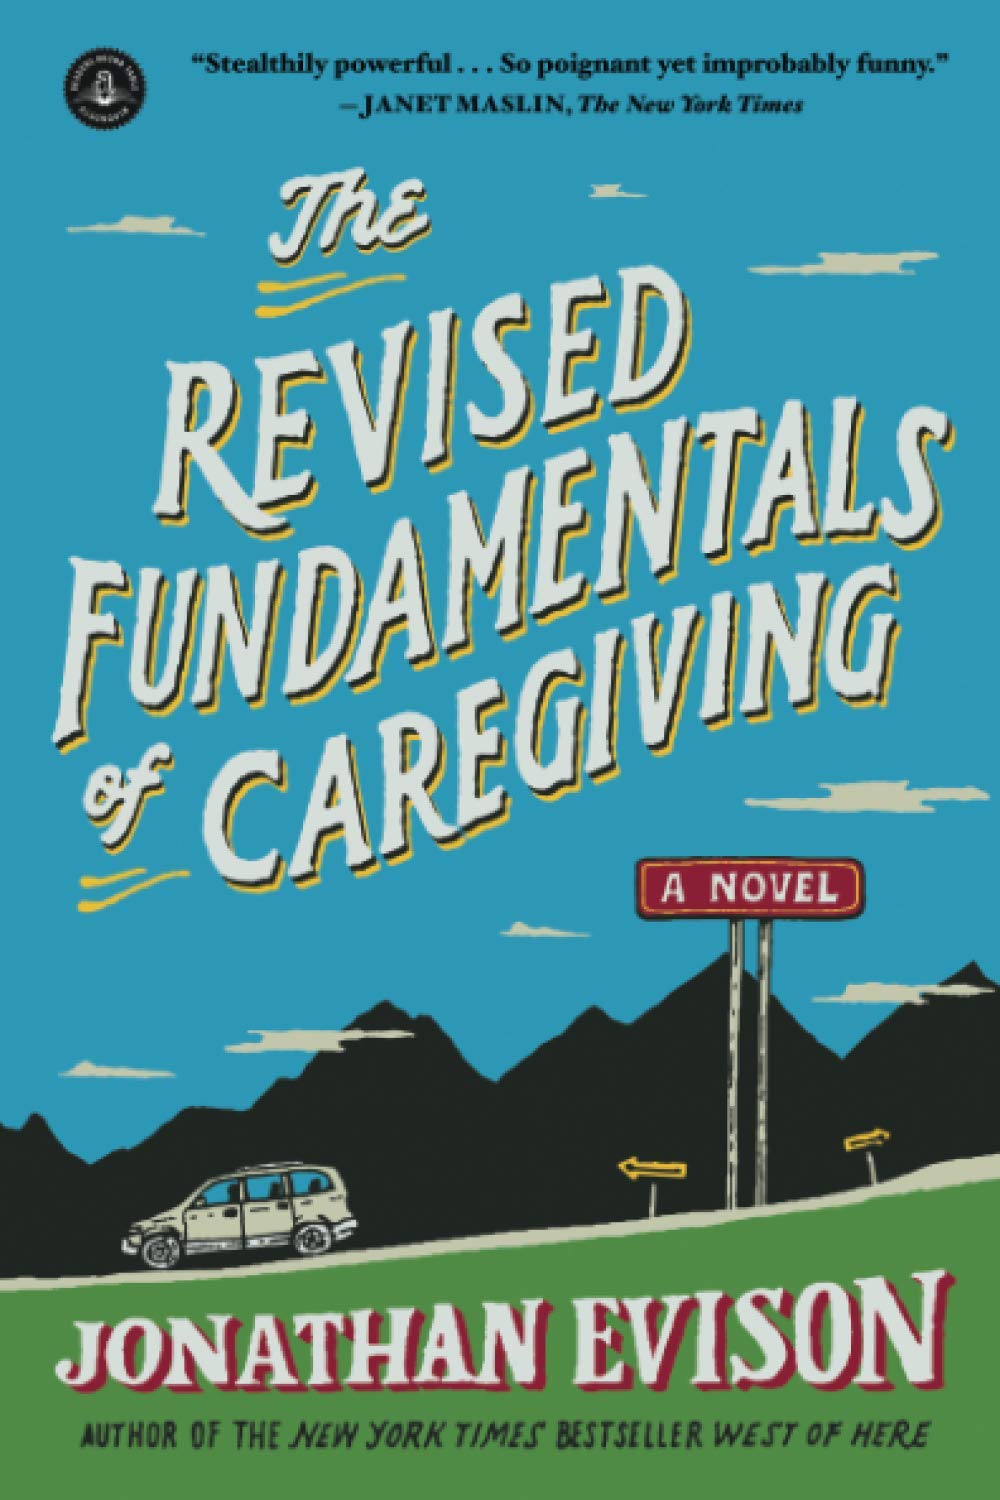 See The Revised Fundamentals of Caregiving in Library Catalog